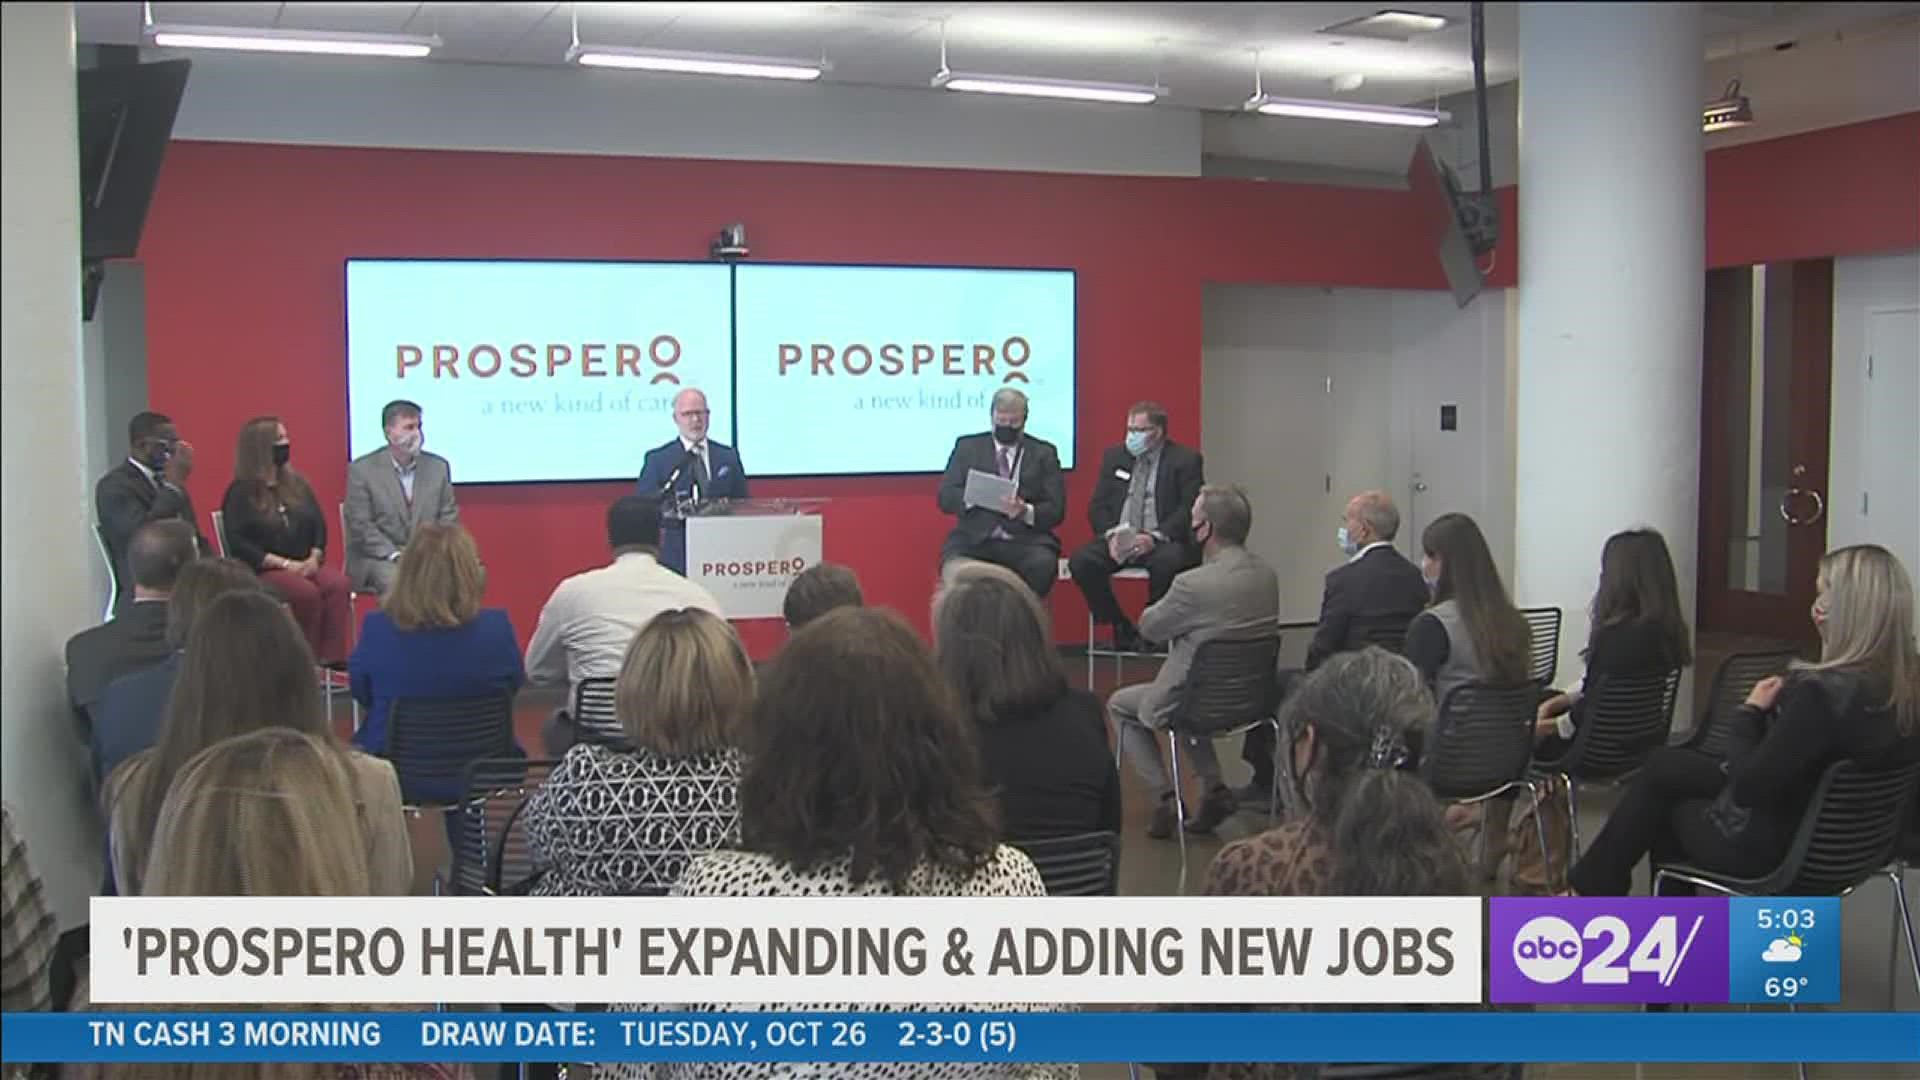 Prospero Health announced Tuesday it would relocate and expand in a new downtown office on South B.B. King Boulevard and add 530 jobs.